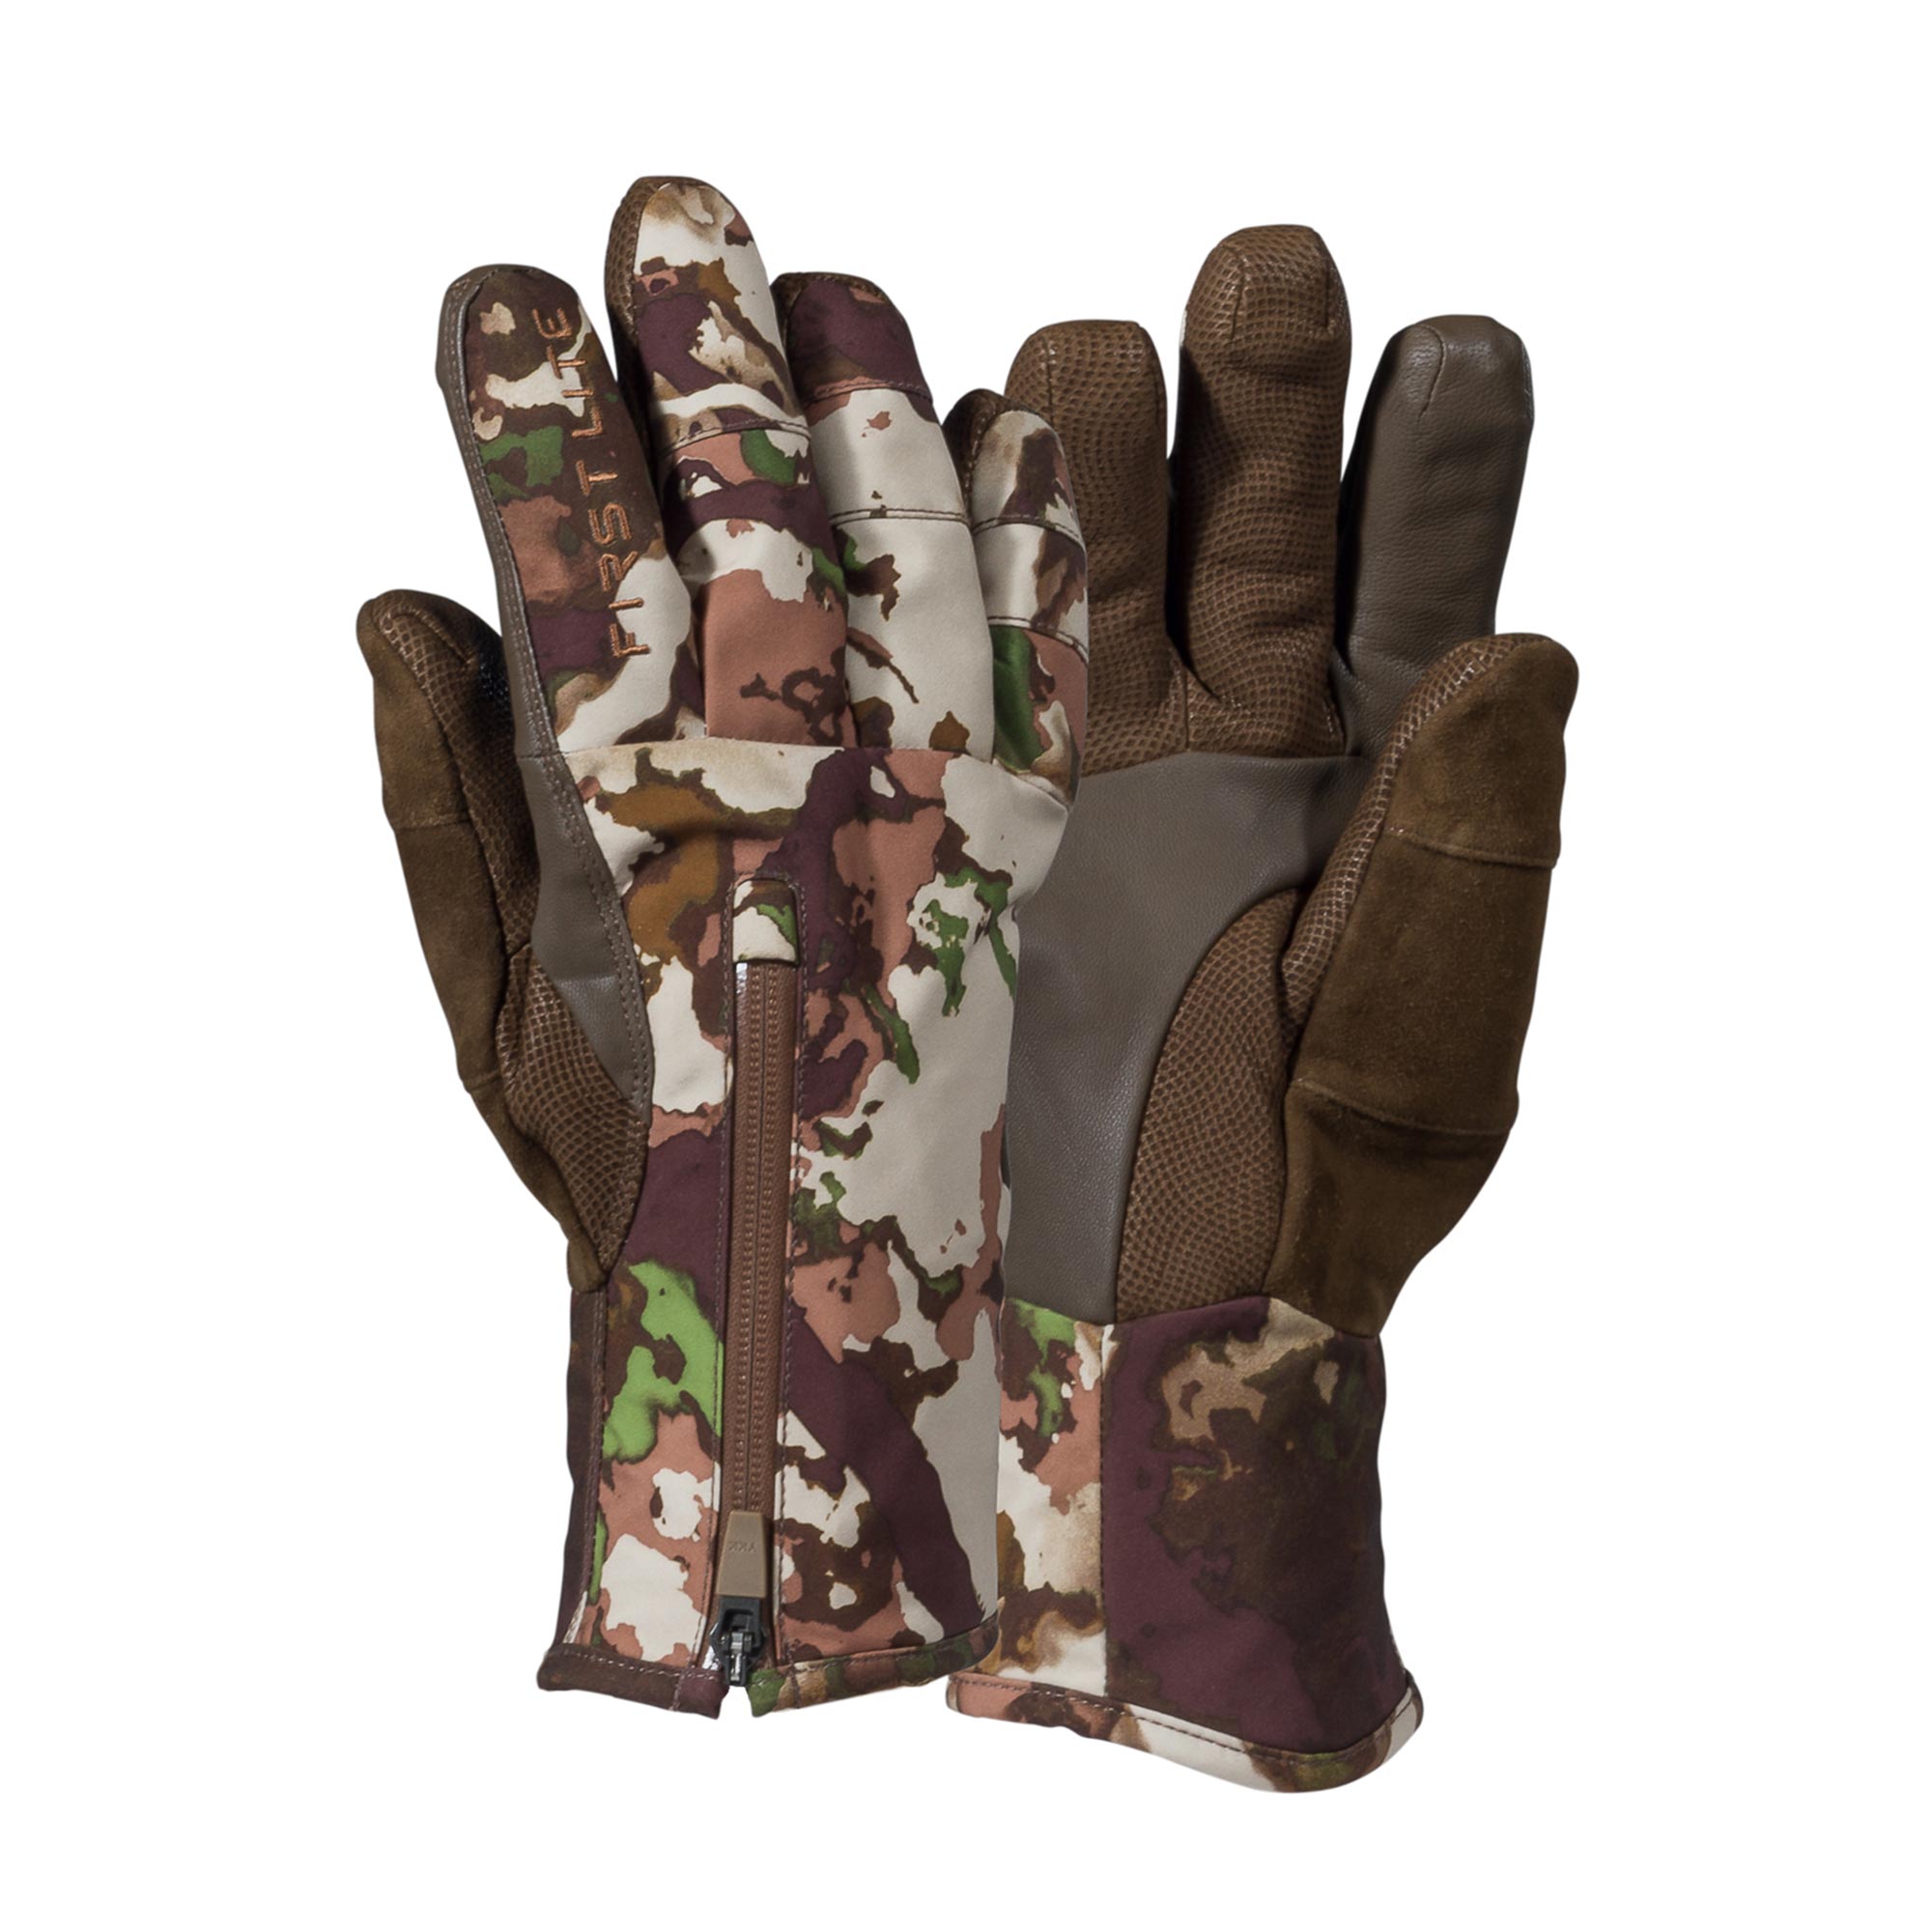 BE:1 Fortress Glove, Hunting Gloves for Cold Weather